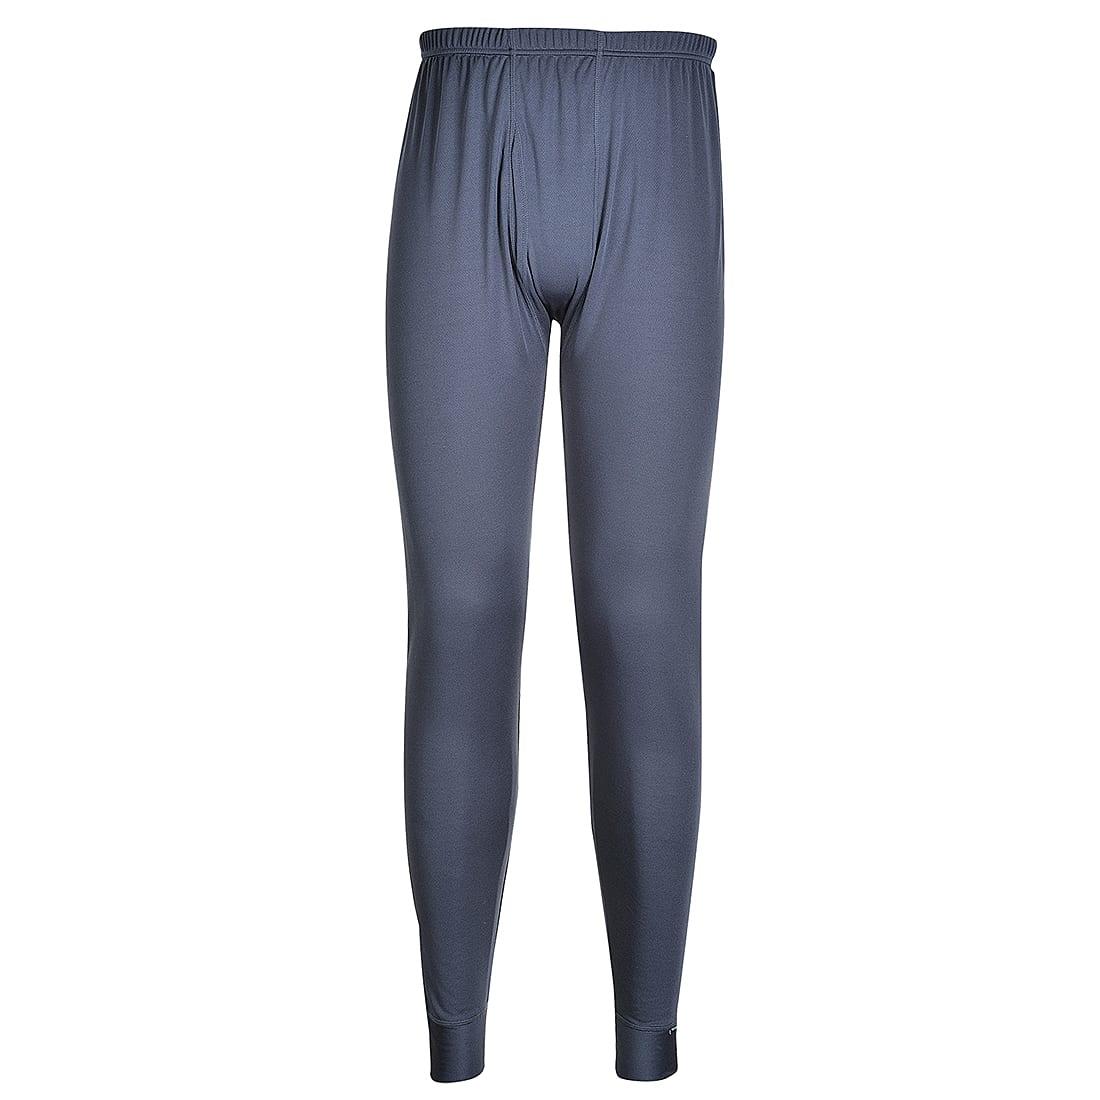 Portwest Thermal Baselayer Leggings in Charcoal (Product Code: B131)